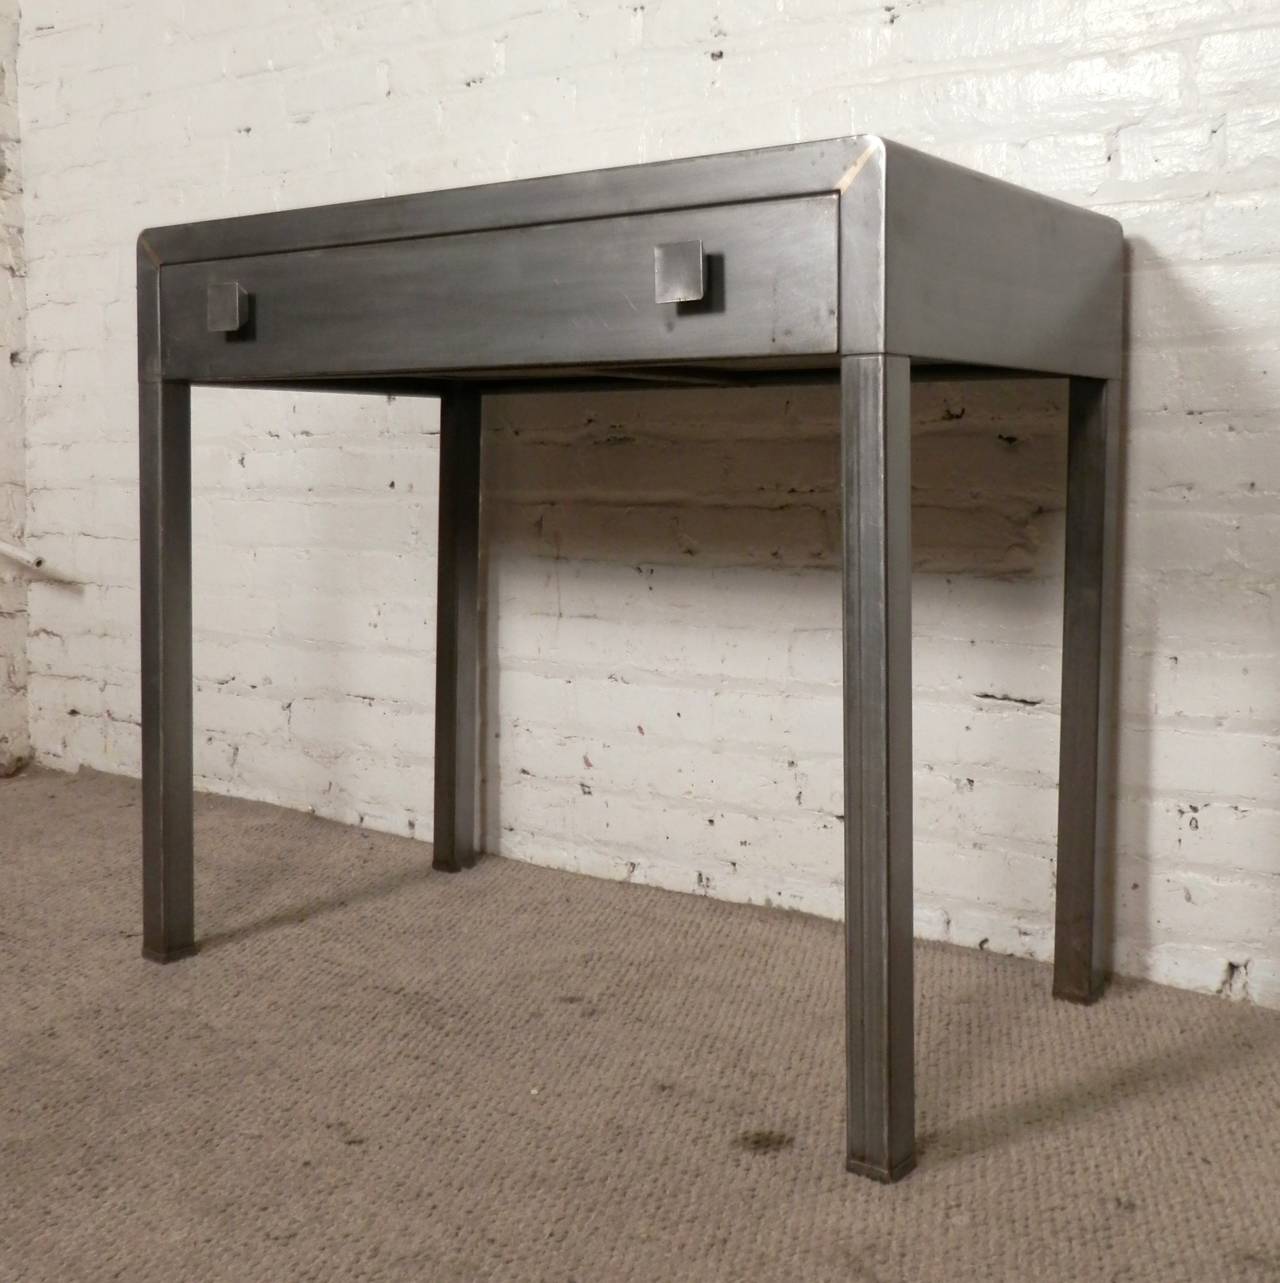 Simple and stream-lined design by Norman Bel Geddes for Simmons Furniture. All metal with large square handles. Newly refinished in a bare metal style finish.
Kneehole: 31w 19d 24h

(Please confirm item location - NY or NJ - with dealer)